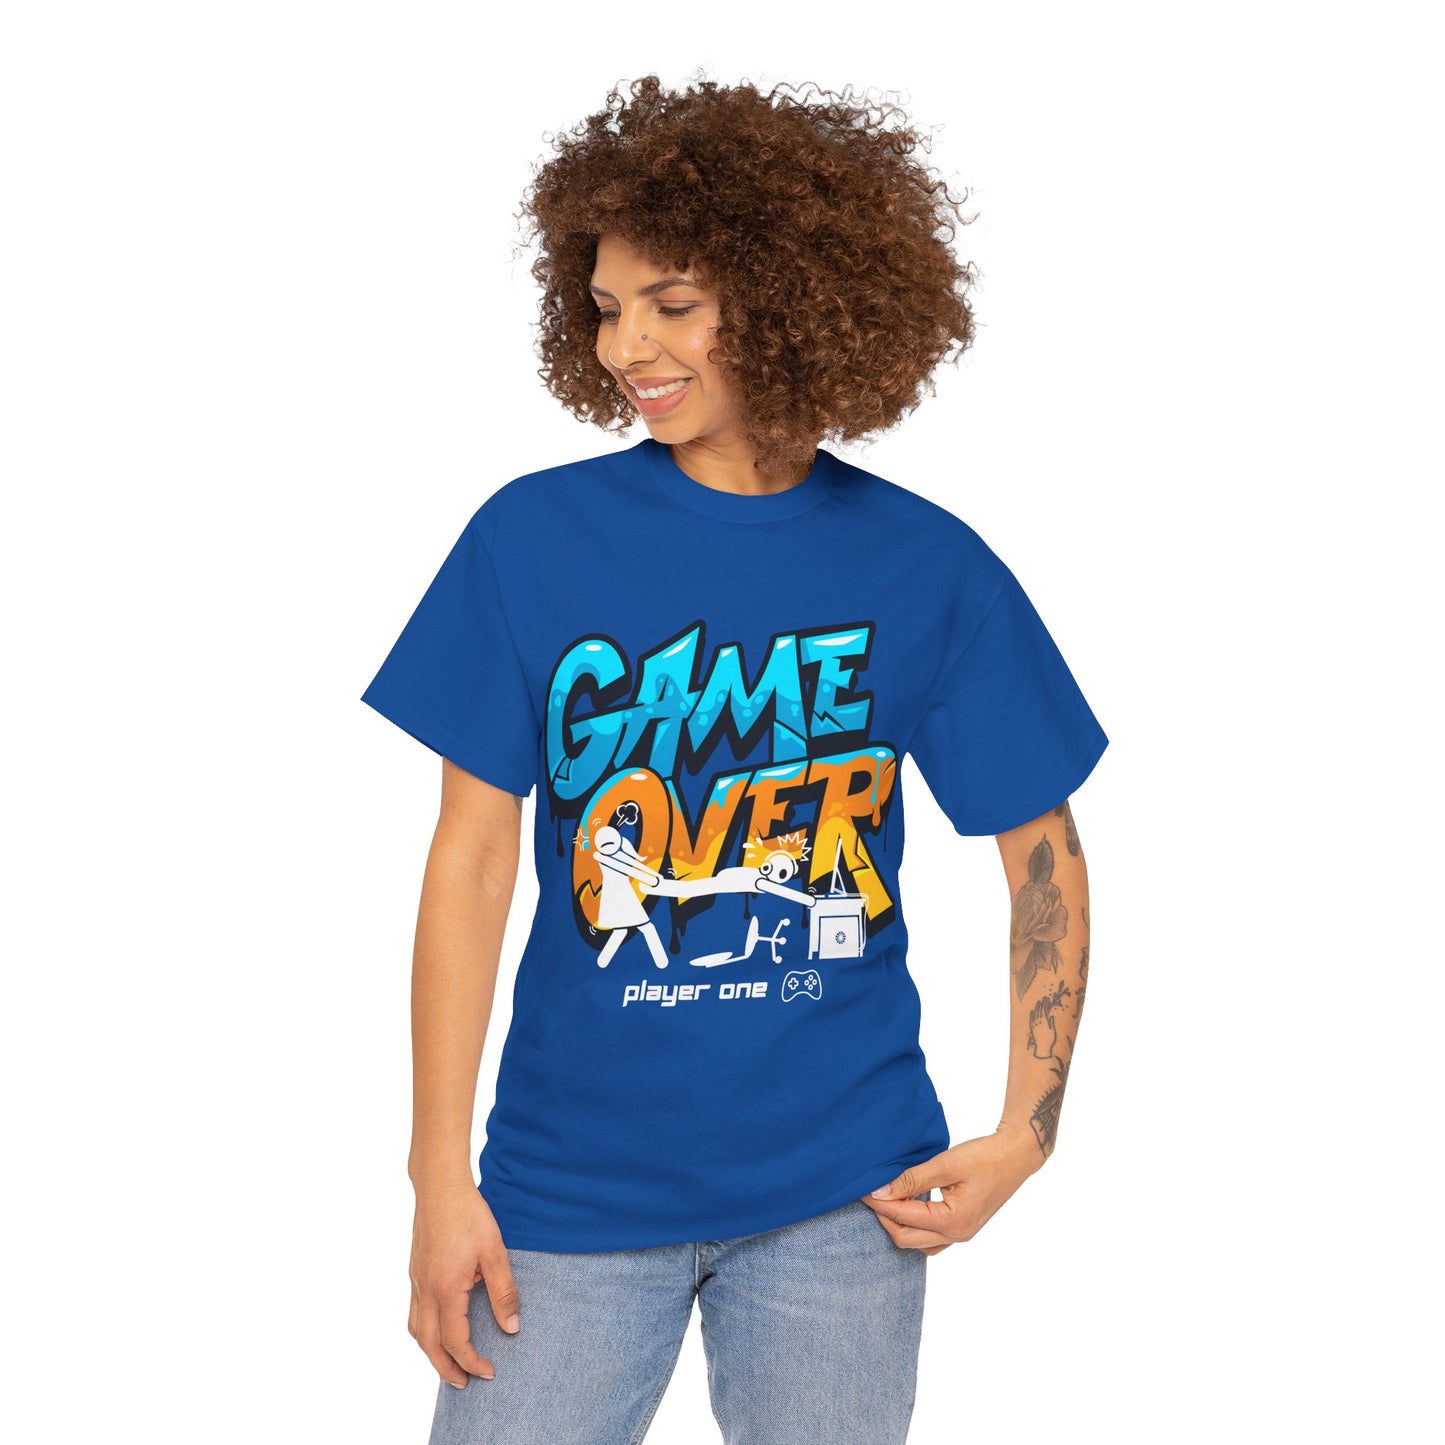 Game Over T-Shirt, Gamer Tee 100% Cotton, 5 Colours, AUS-USA-CAN warehouse, Free post.